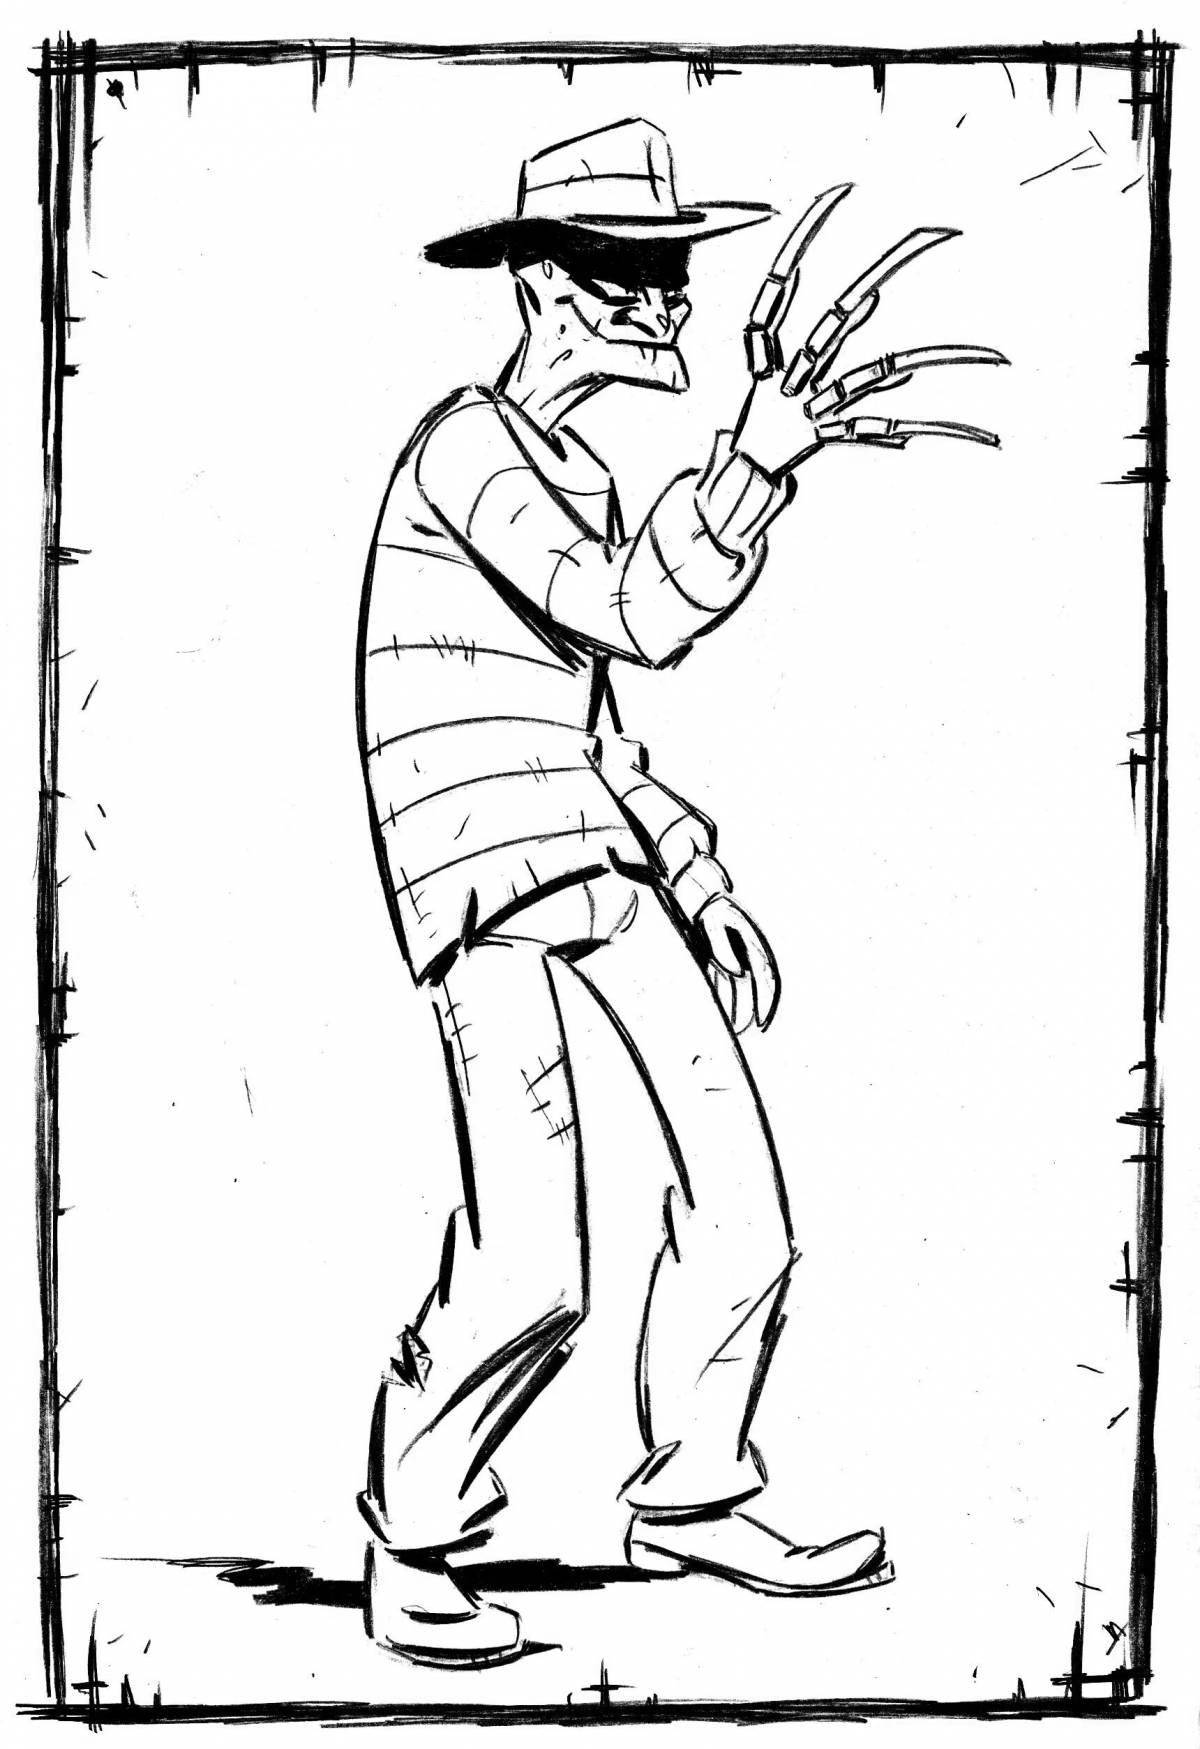 Frightening Freddy Krueger Coloring Page